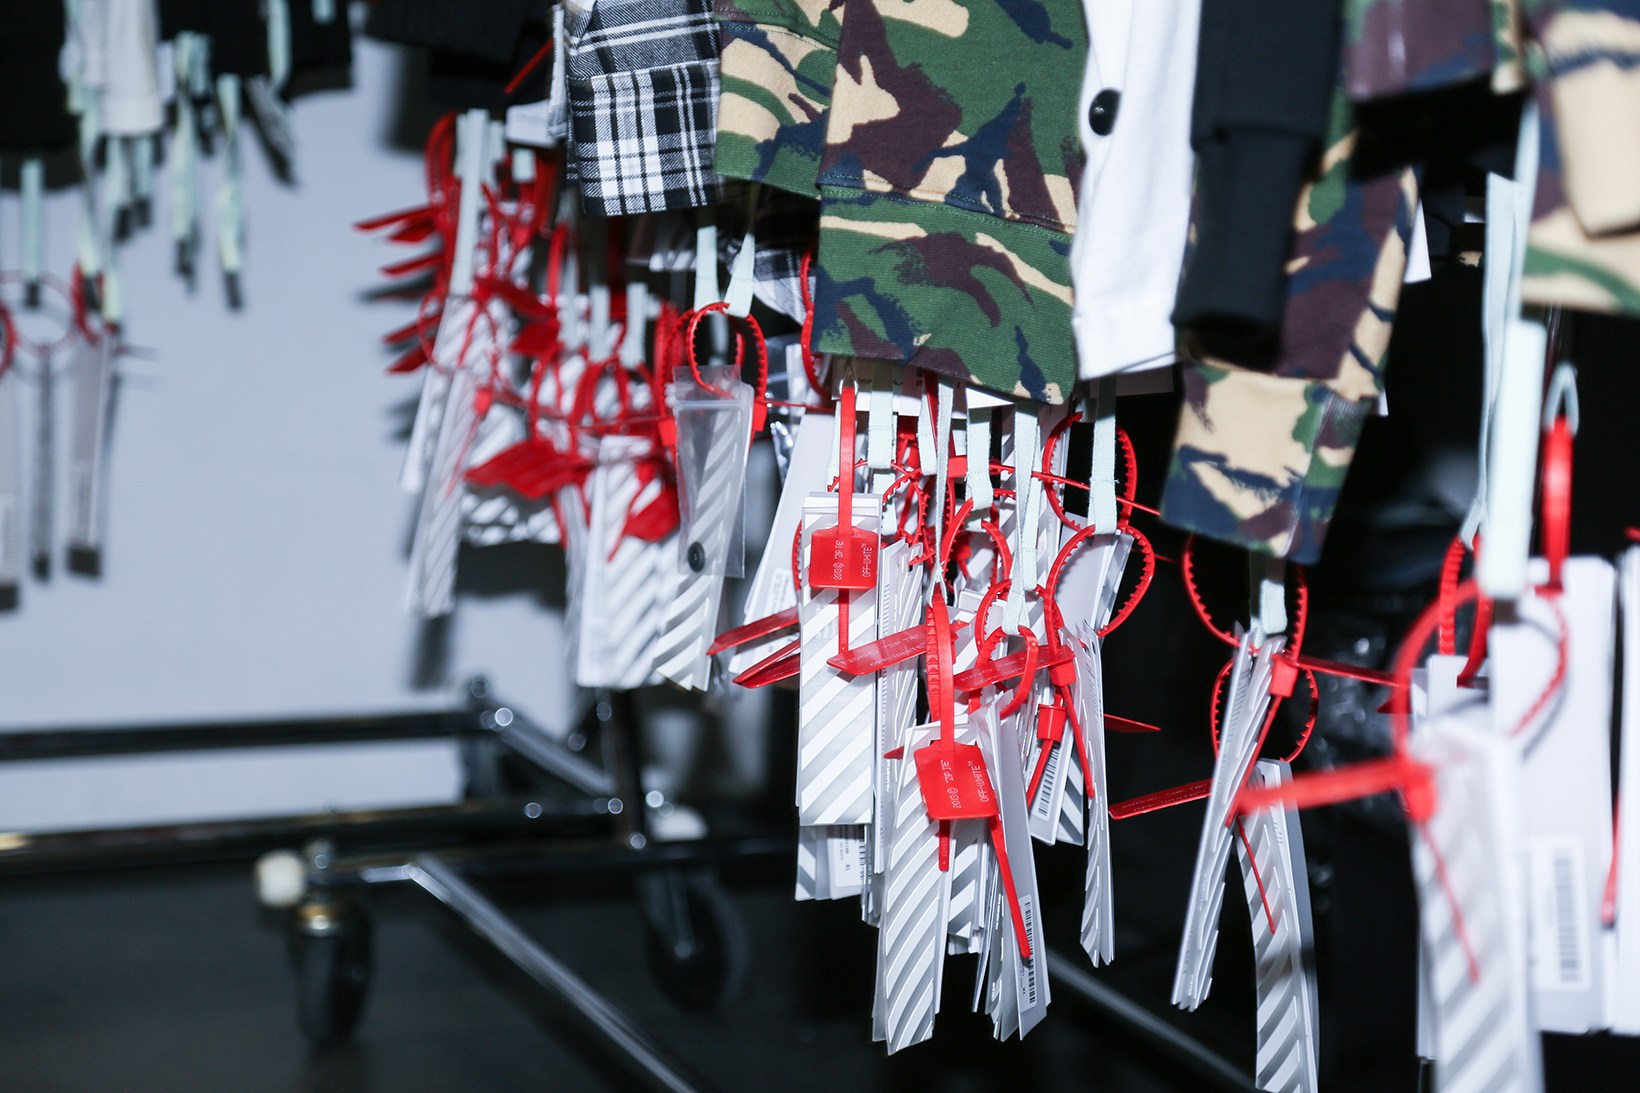 off-white-pop-up-maxfield-photographs-pause12